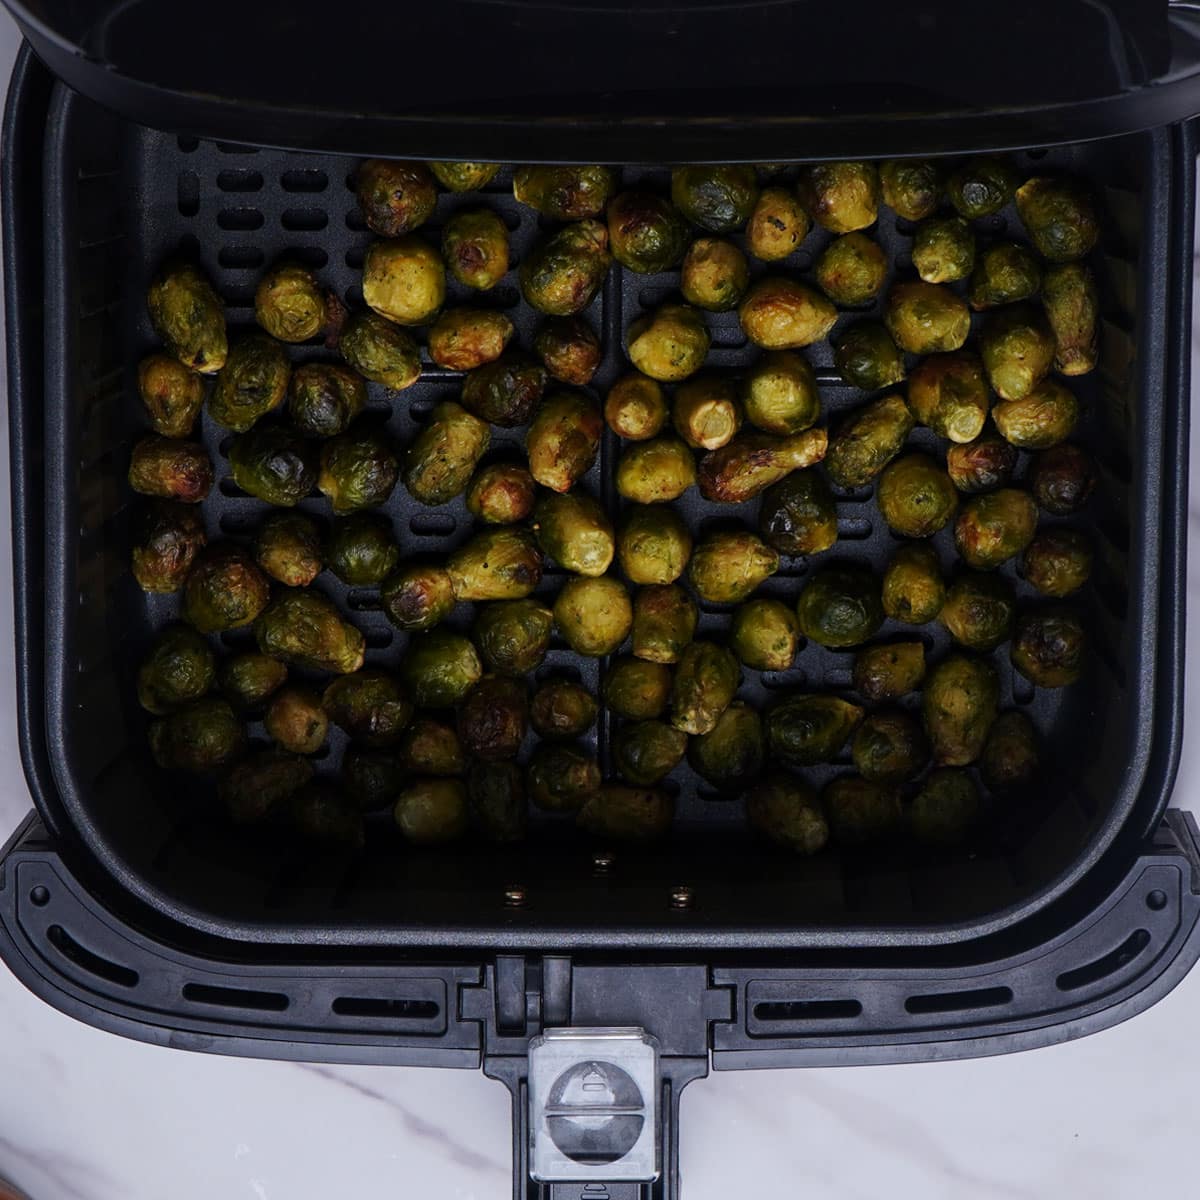 Cooking frozen Brussels sprouts in air fryer